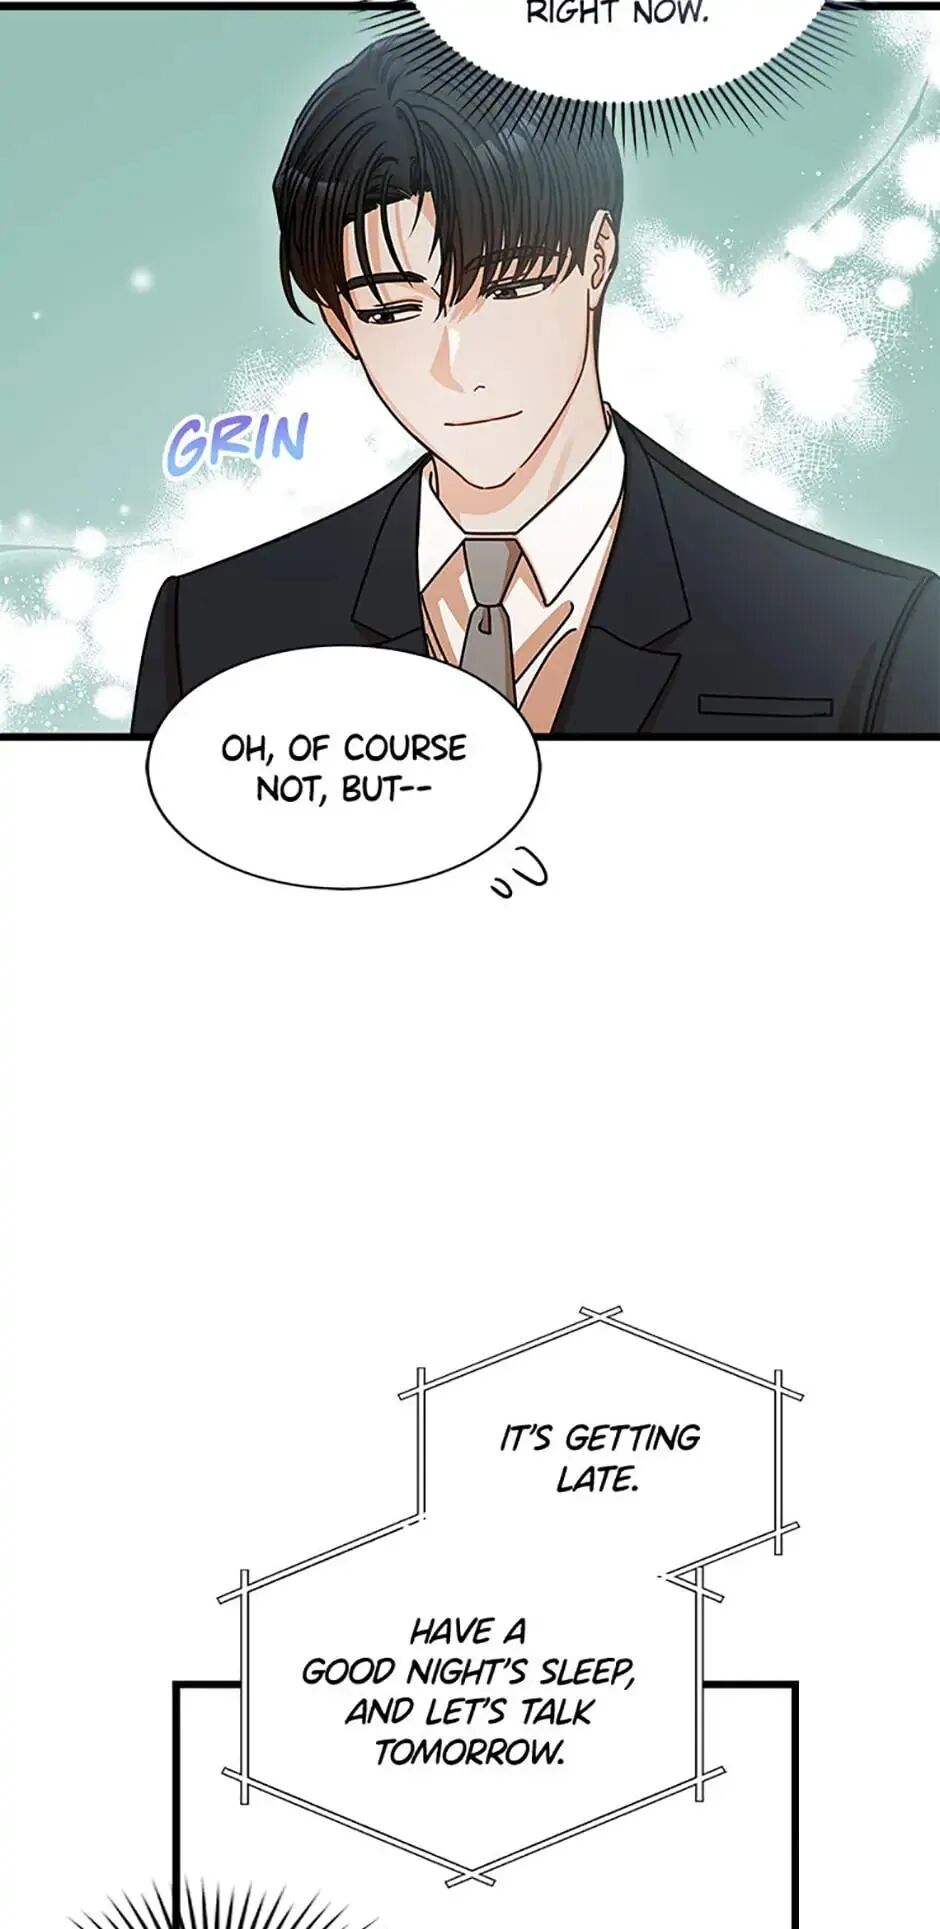 I Confessed to the Boss Chapter 37 - ManhwaFull.net